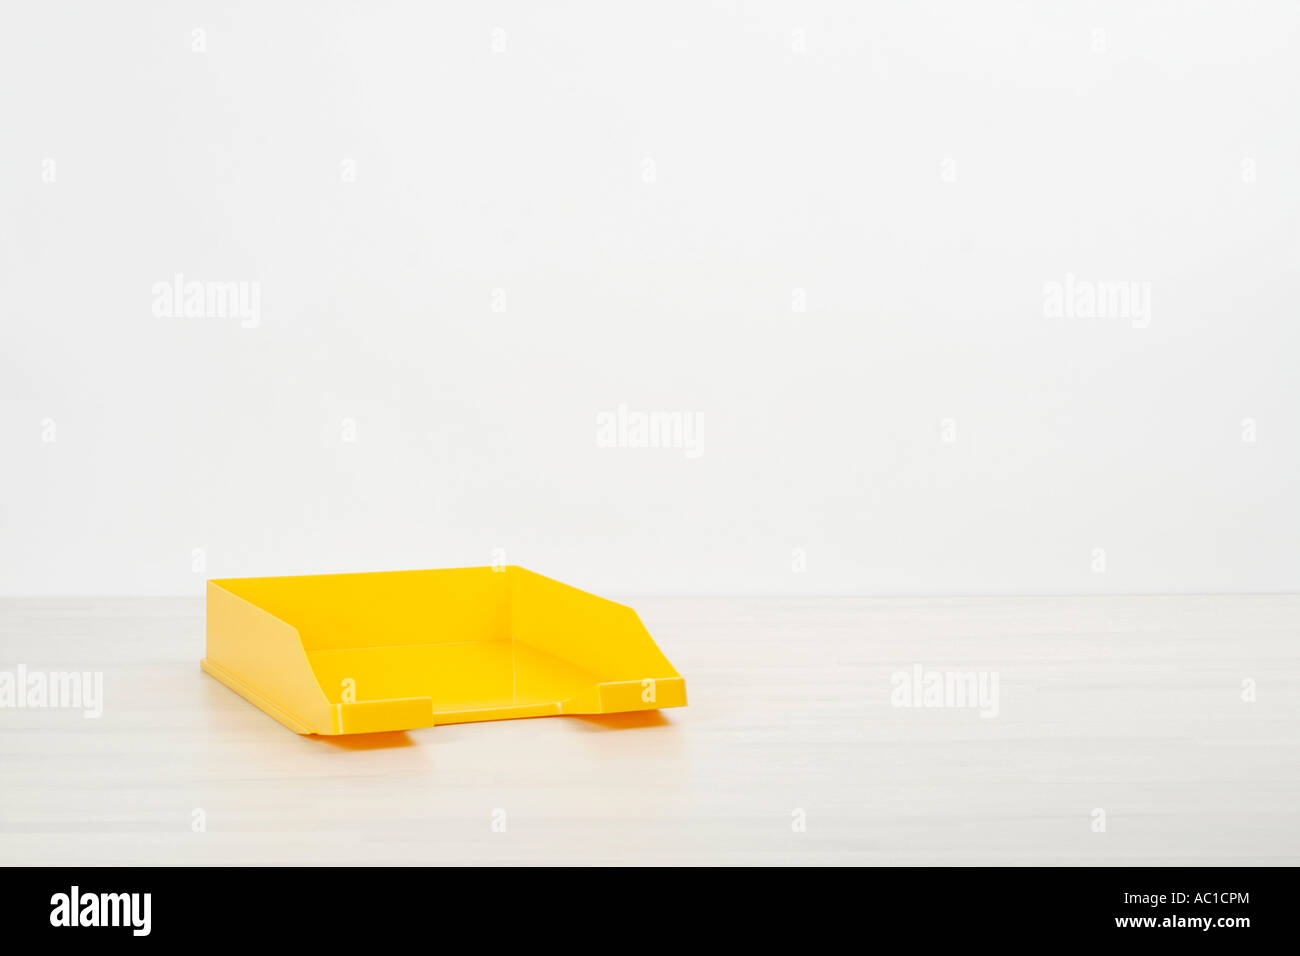 Filing tray on desk yellow close up Stock Photo